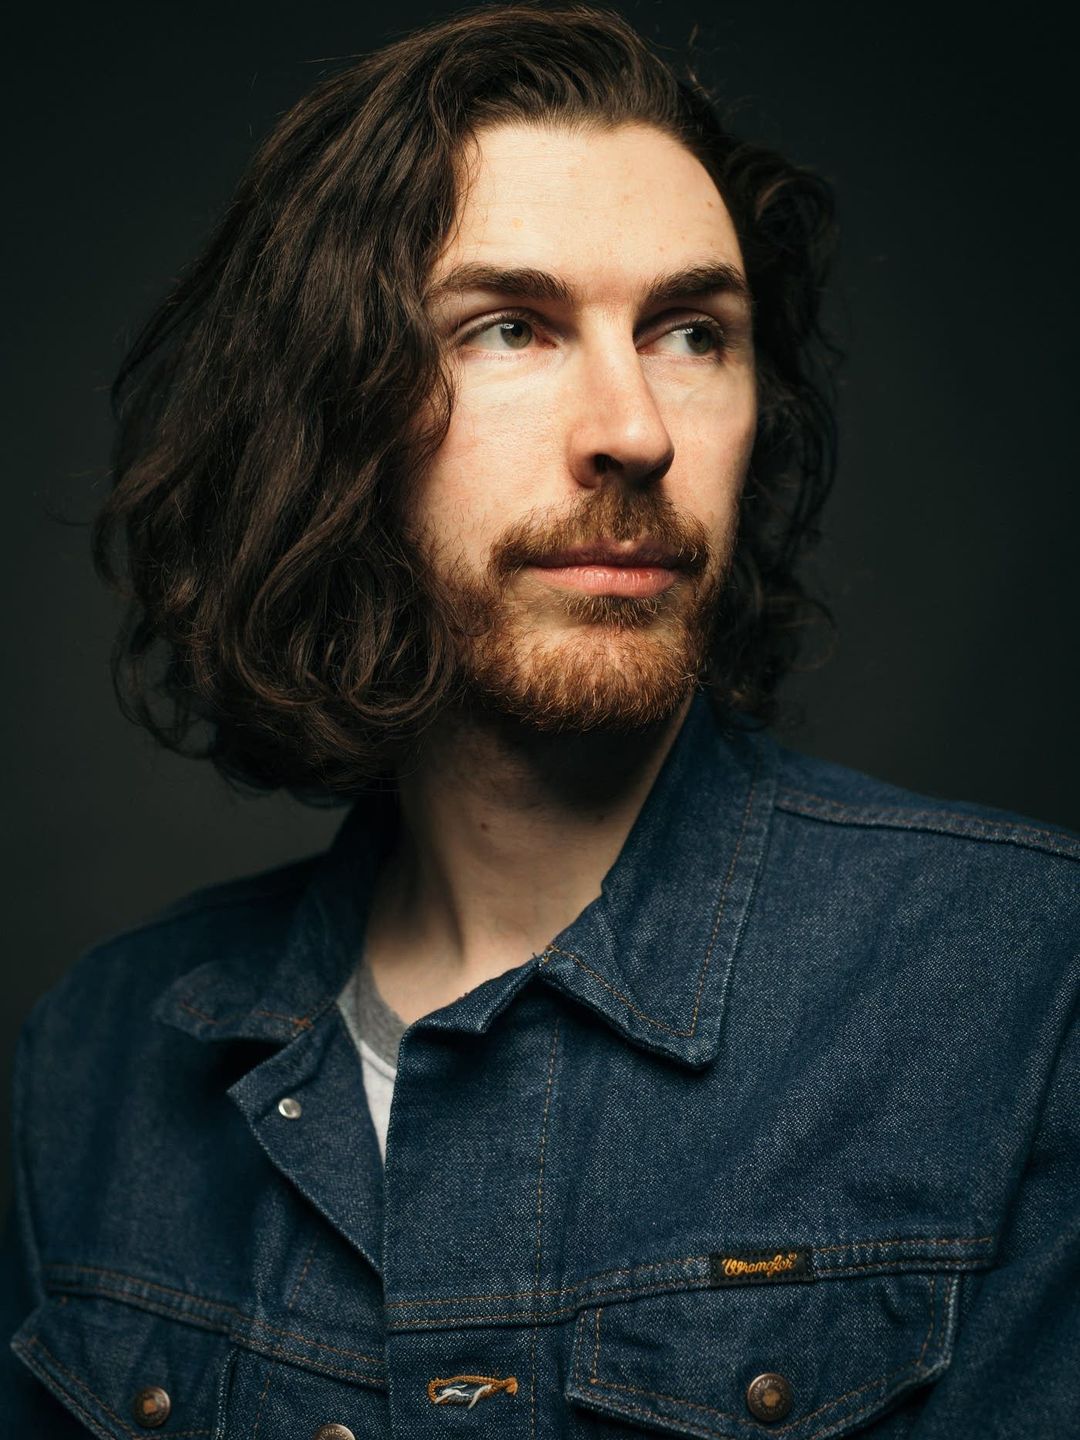 Hozier in his youth